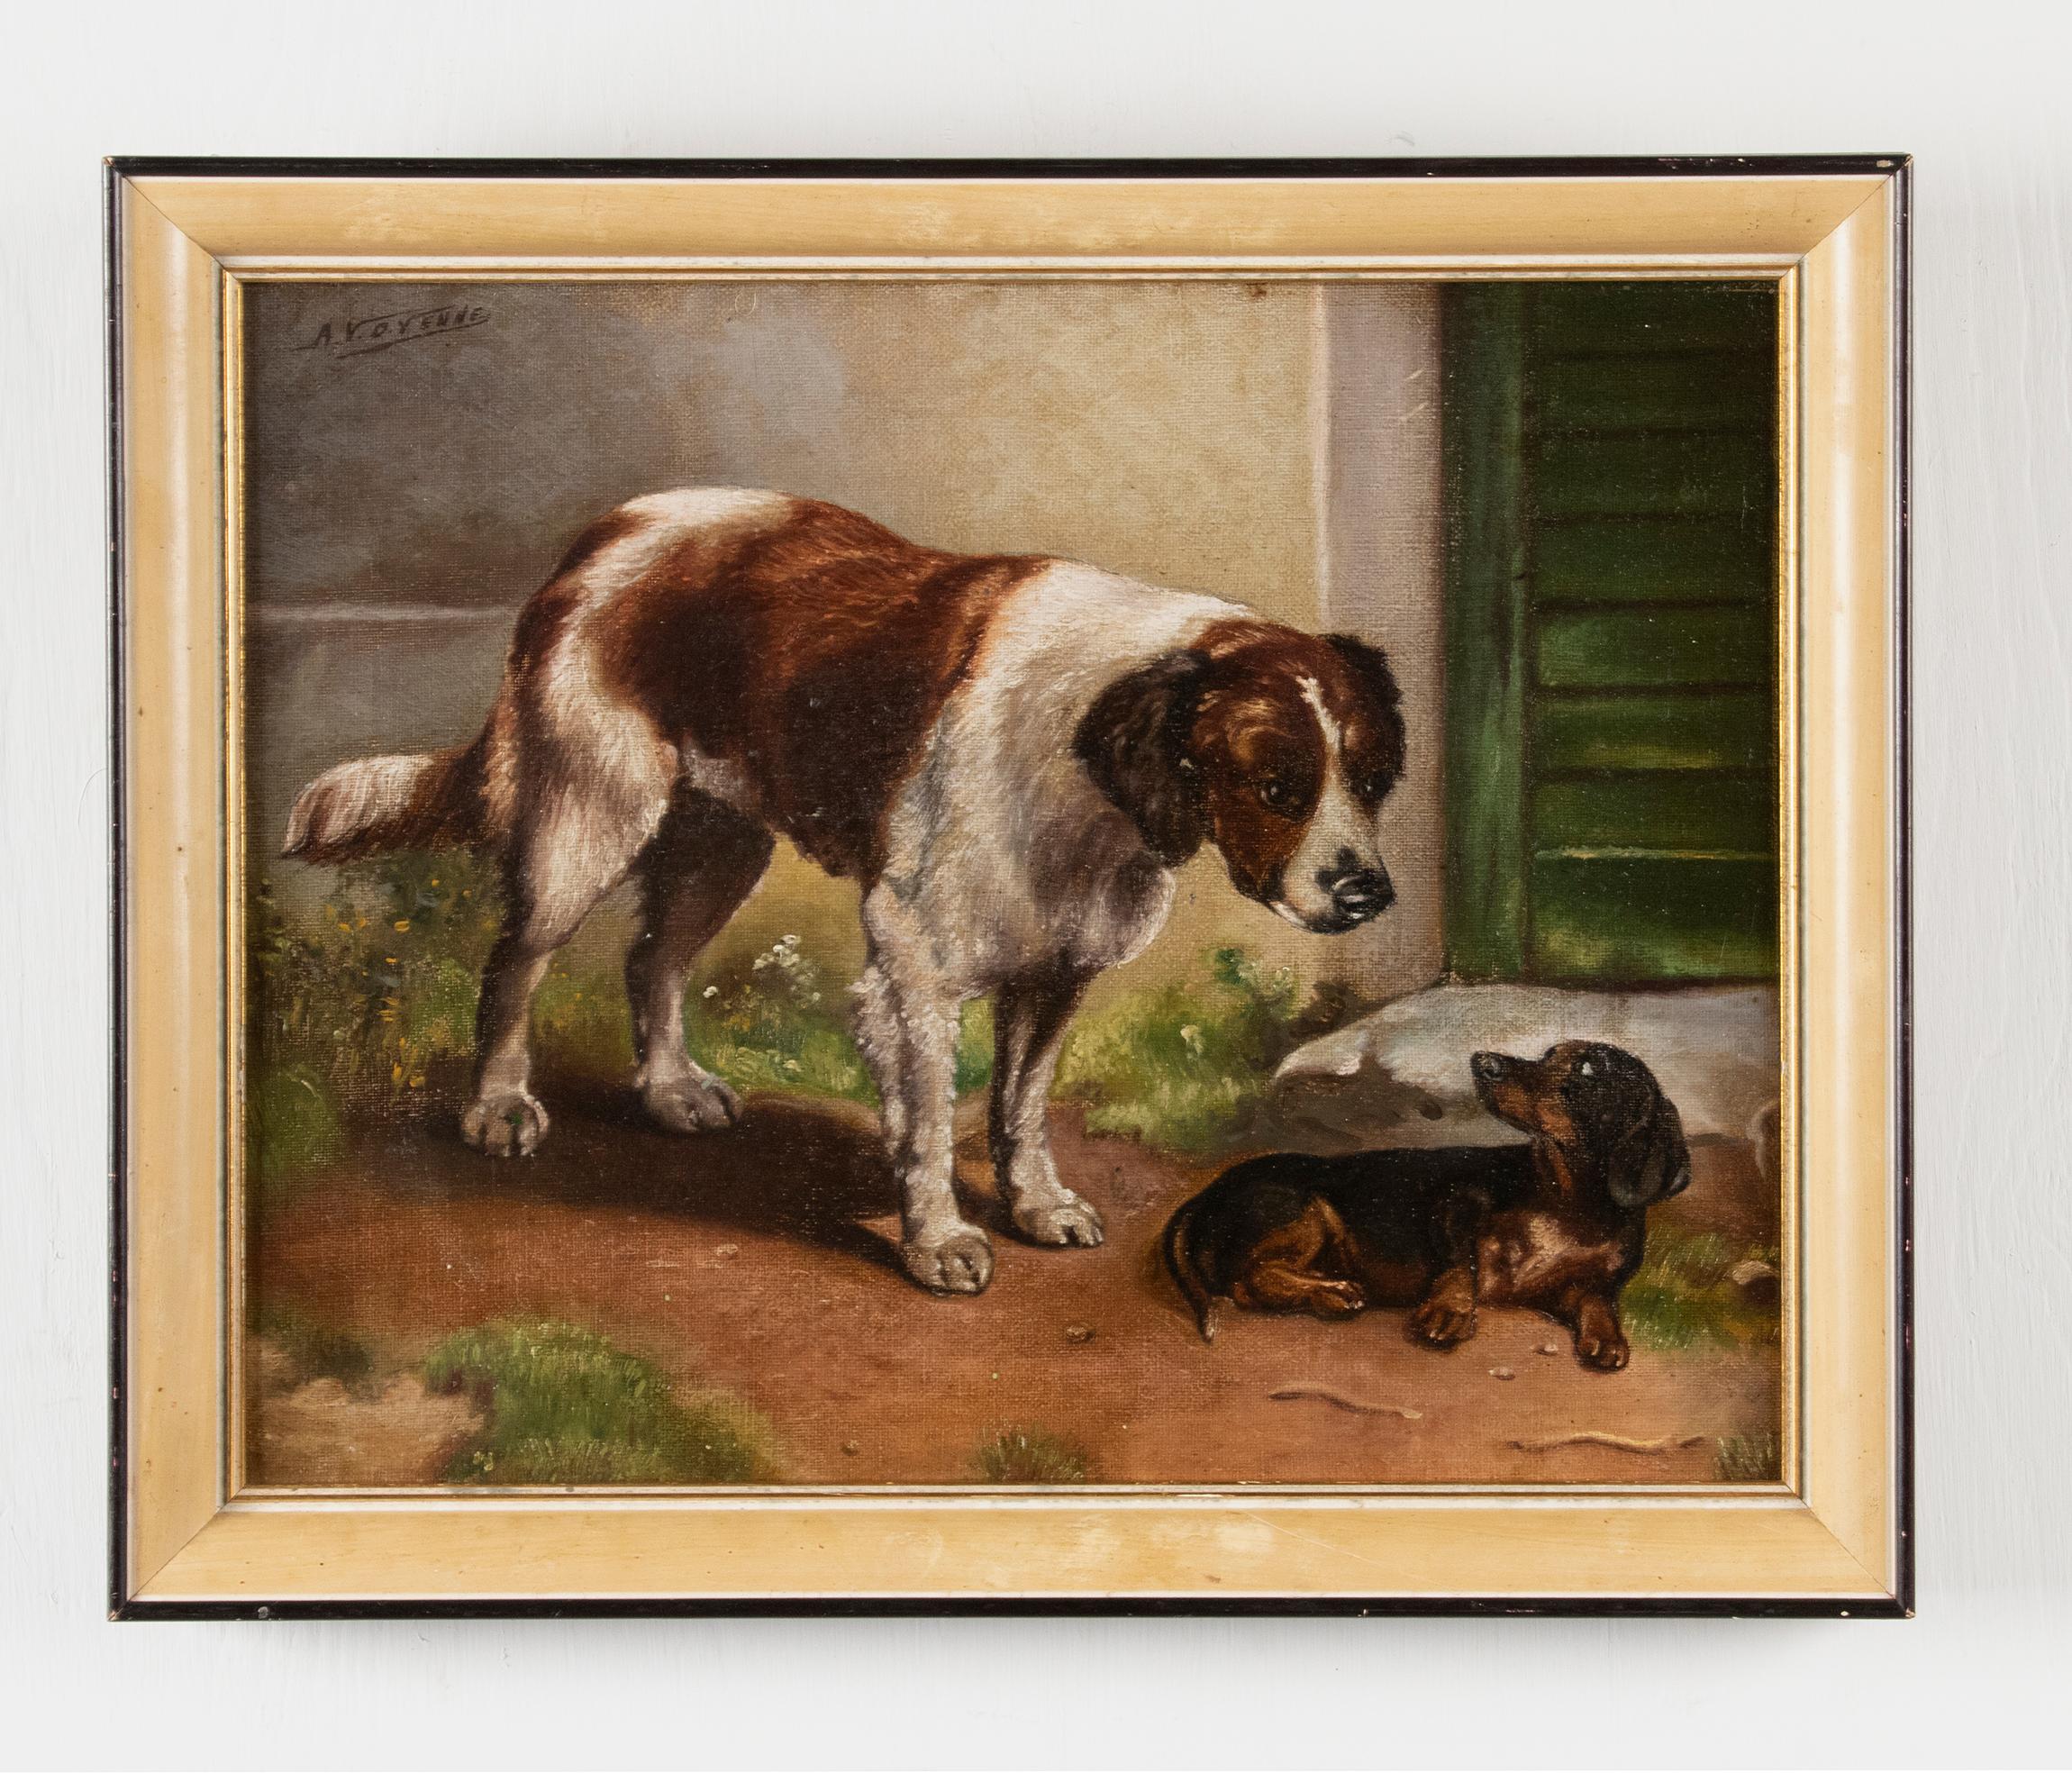 A Belgium antique oil painting of two dogs, a Dachshund and a brown Border Collie, painted on canvas. It dates from about 1910-1930. The wooden frame is of more recent date (ca. 1960). It is signed top left: 